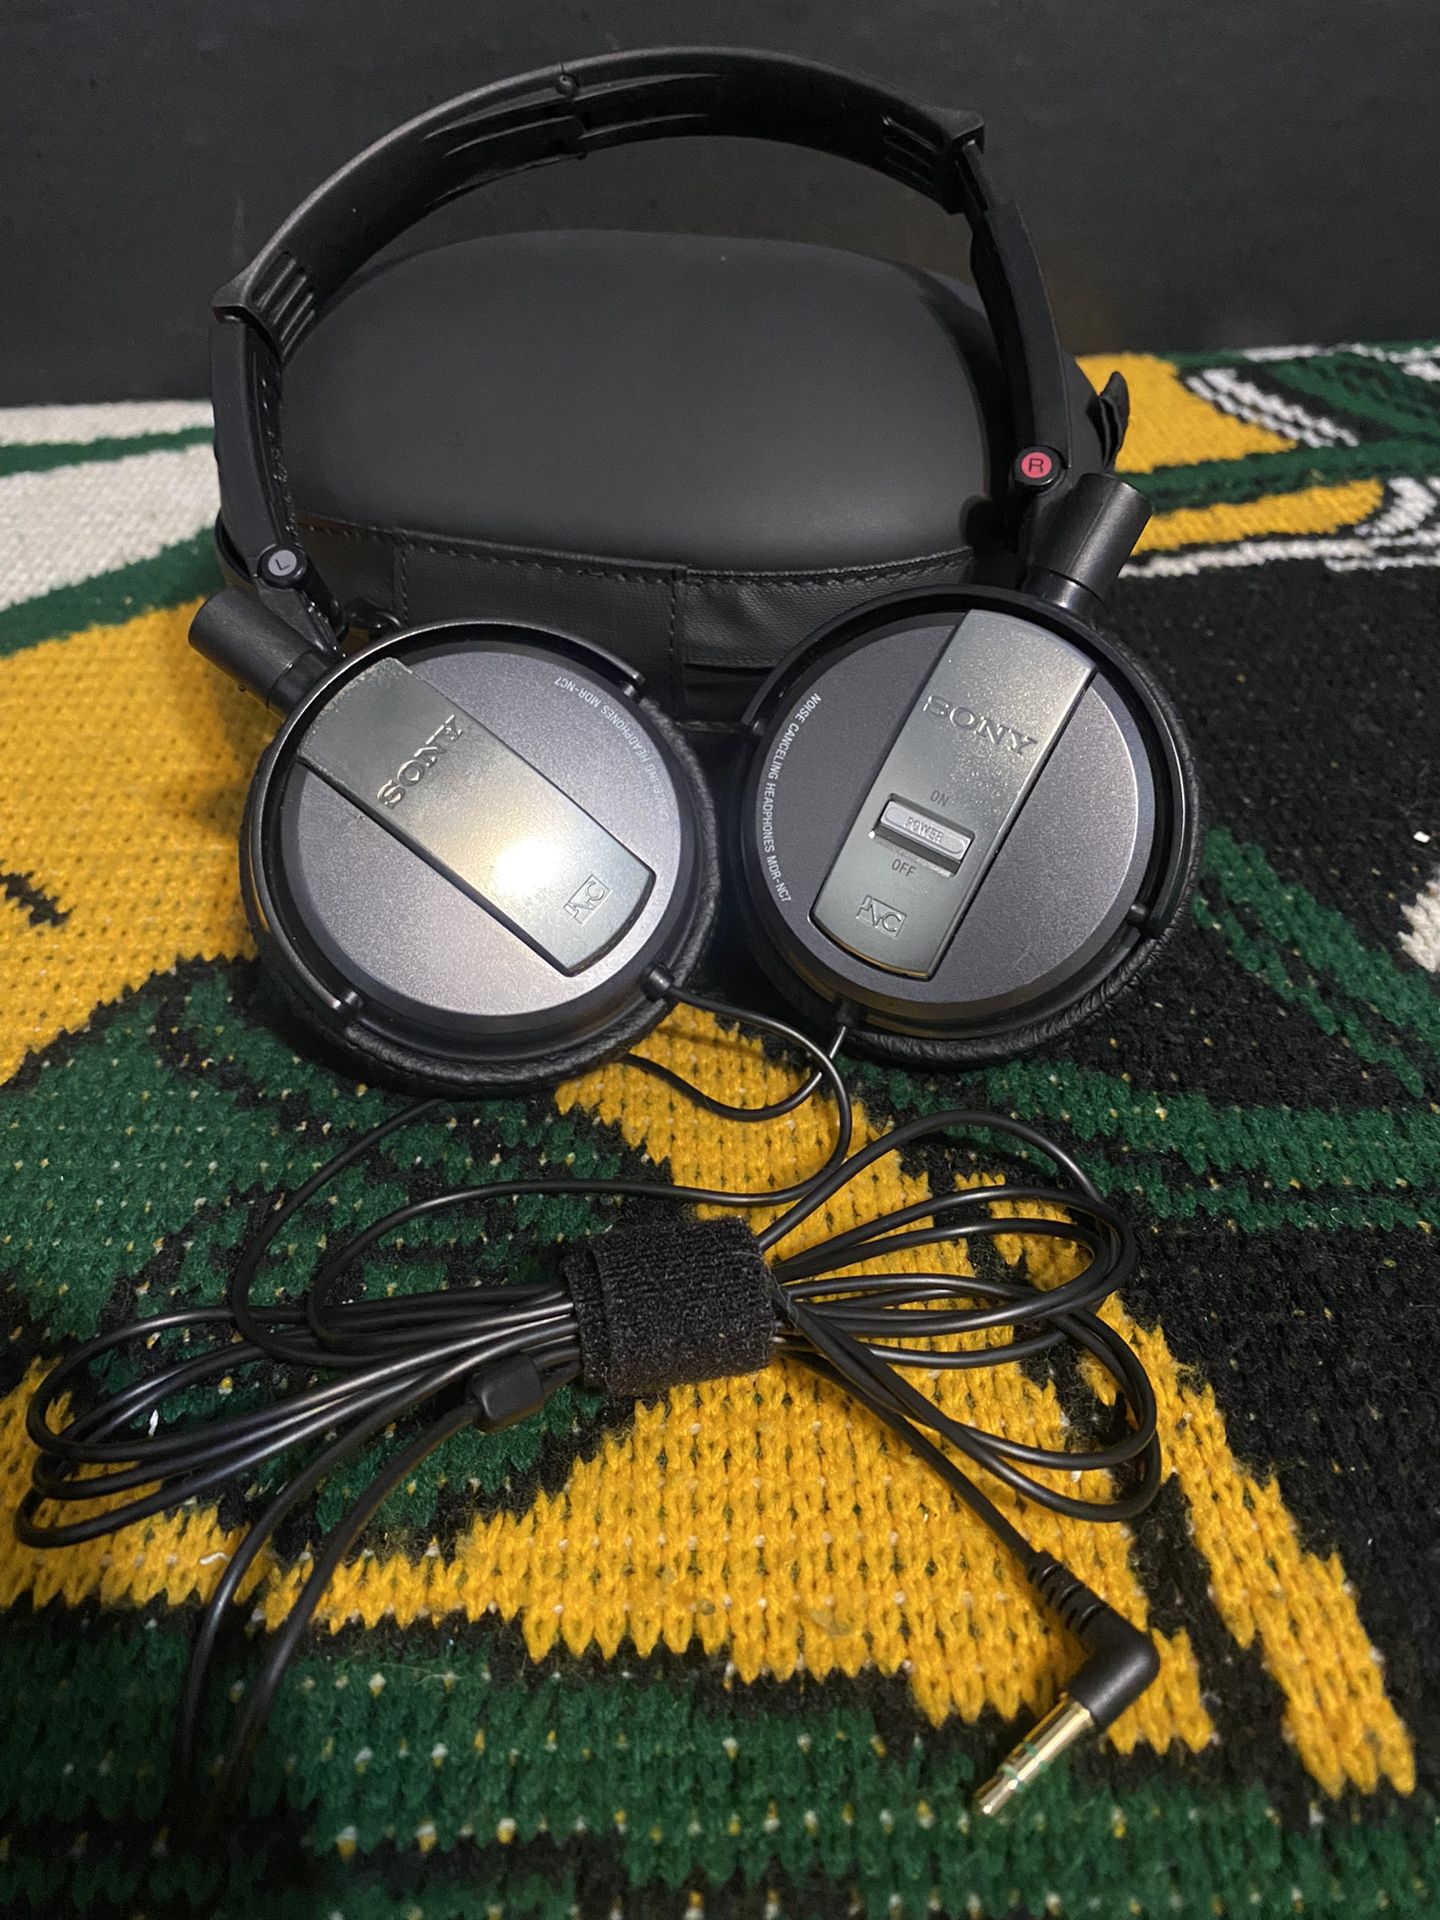 Sony MDR-NC7 Wired Noise Canceling On-Ear Headphones. 